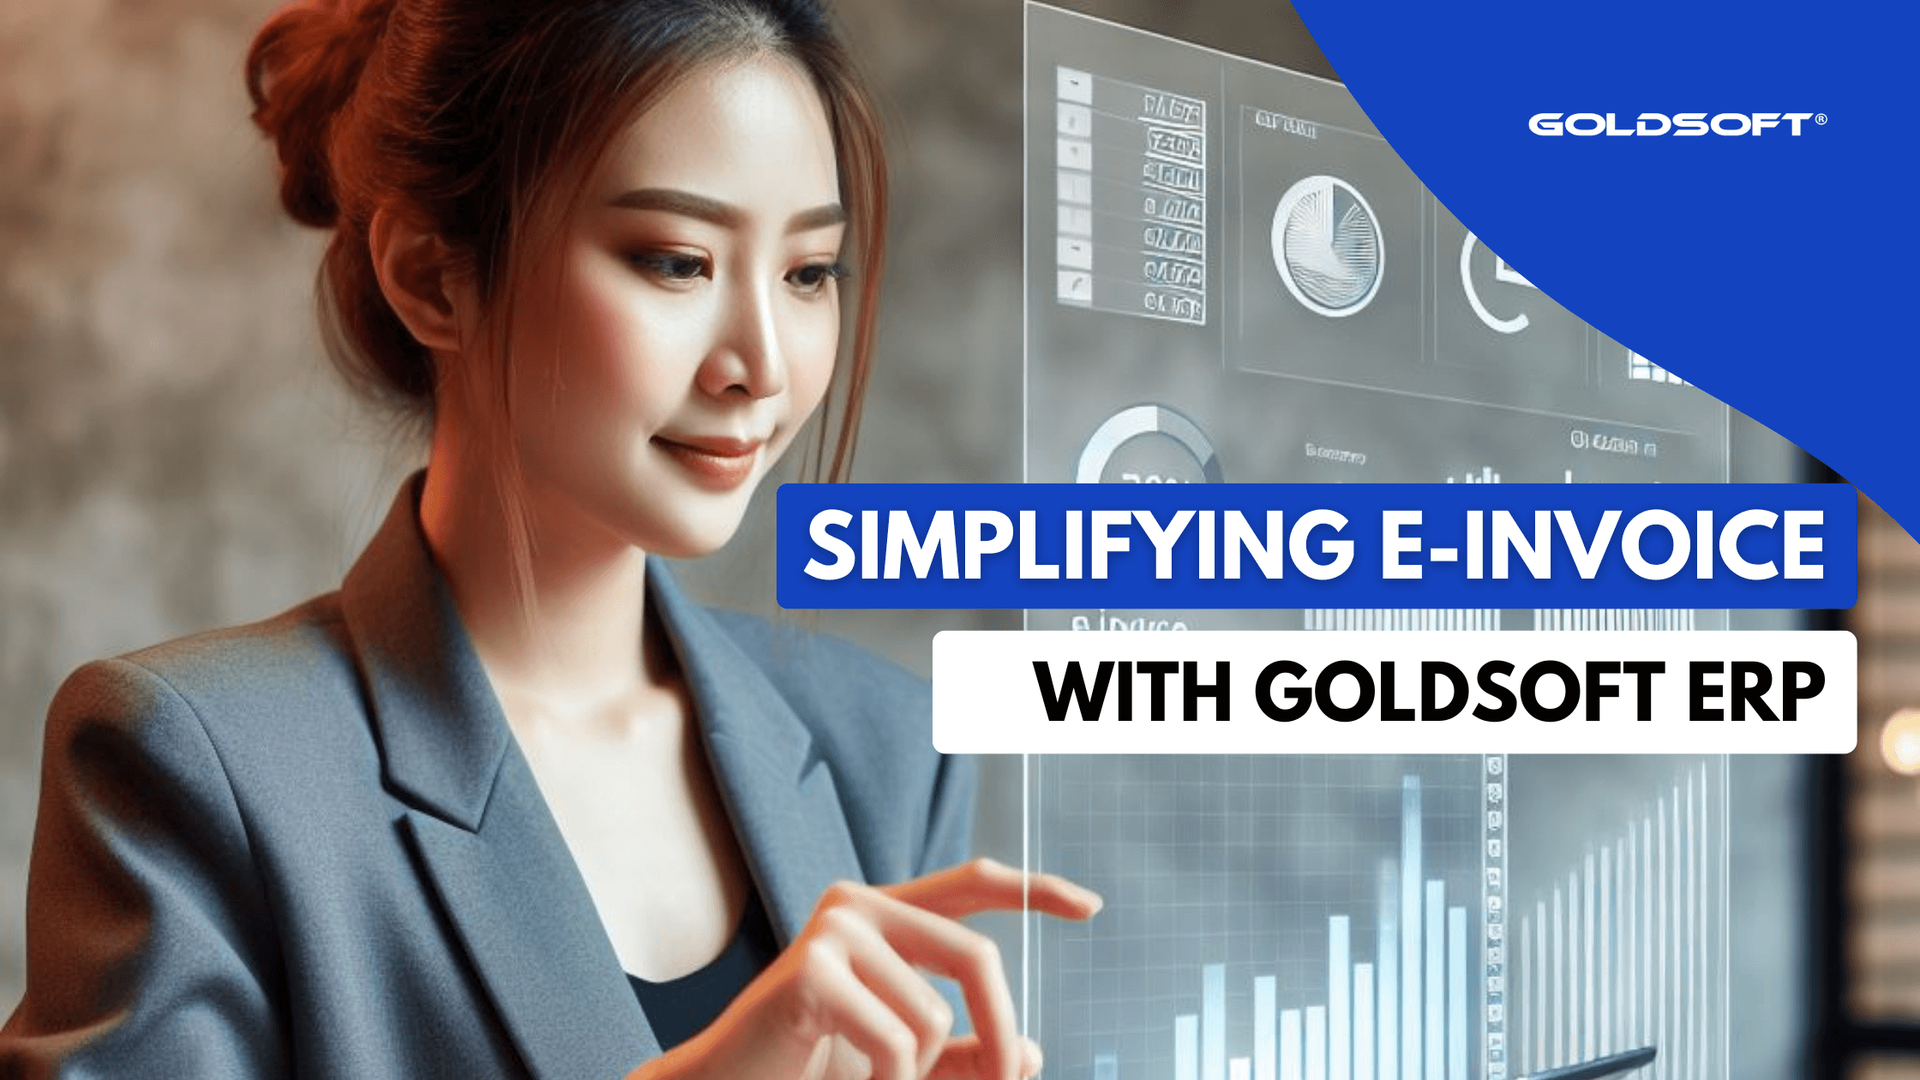 Goldsoft ERP system drives growth and efficiency in Malaysia's digital and e-invoice era.